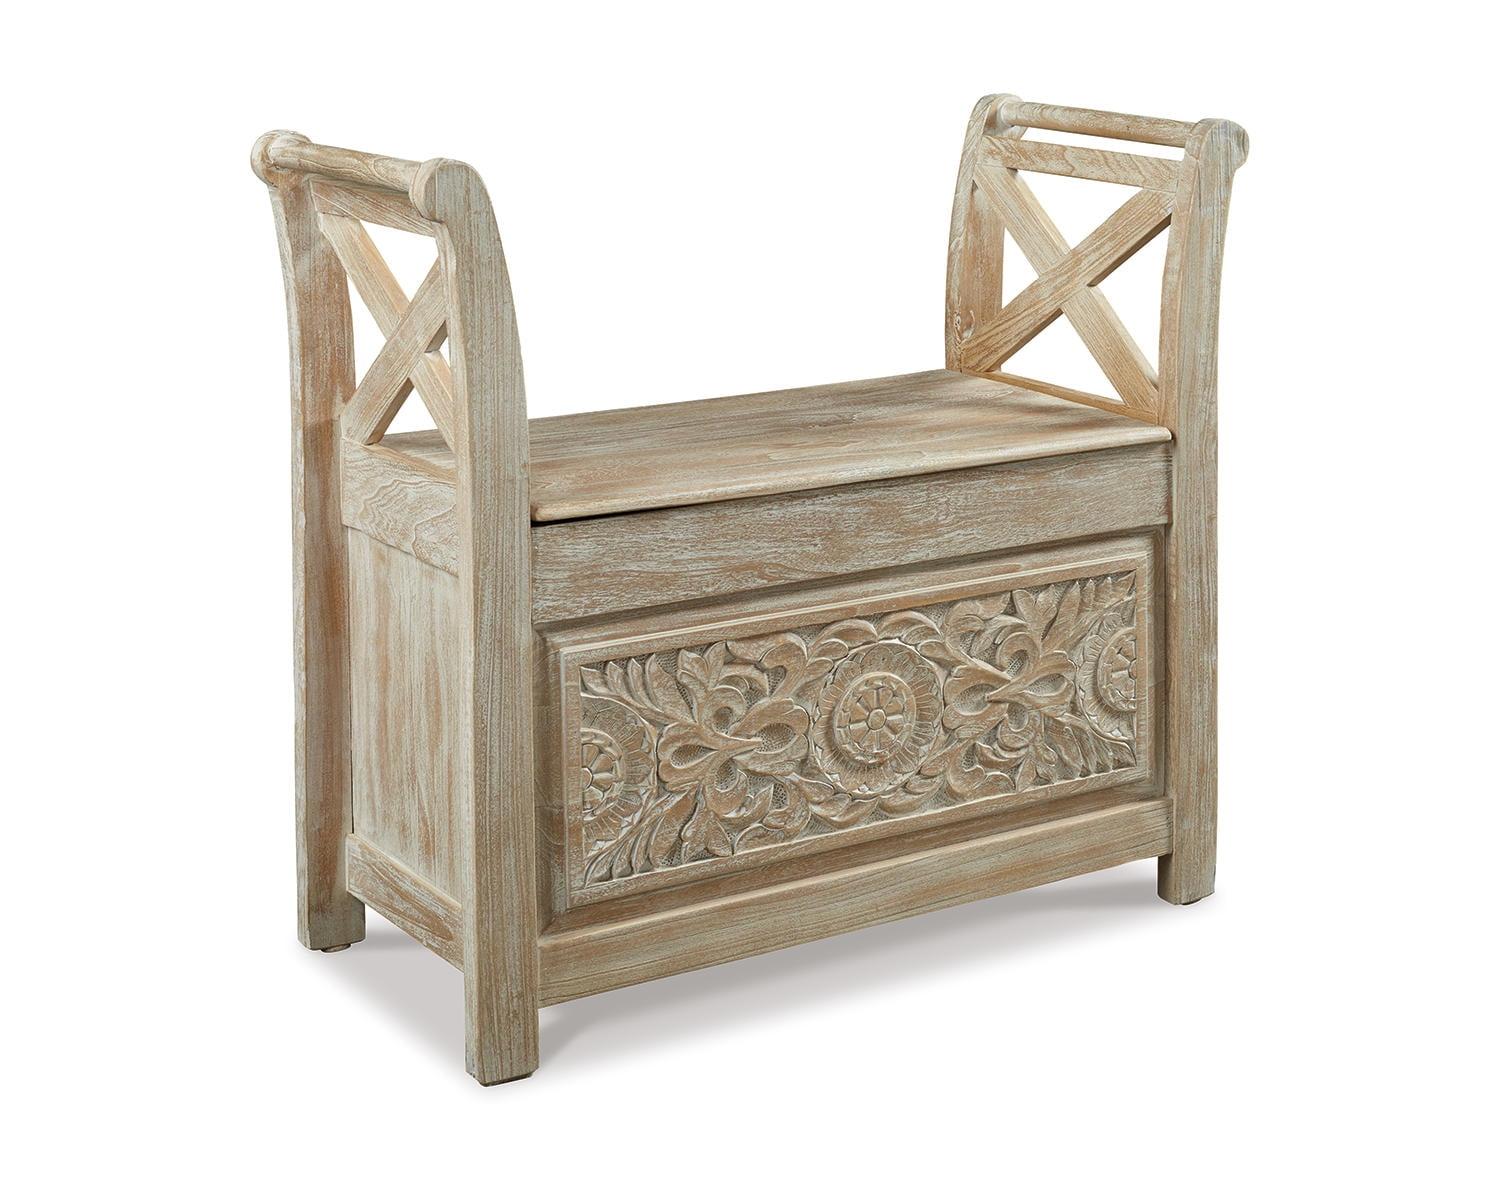 Transitional Beige Whitewashed Storage Accent Bench with Carved Florals